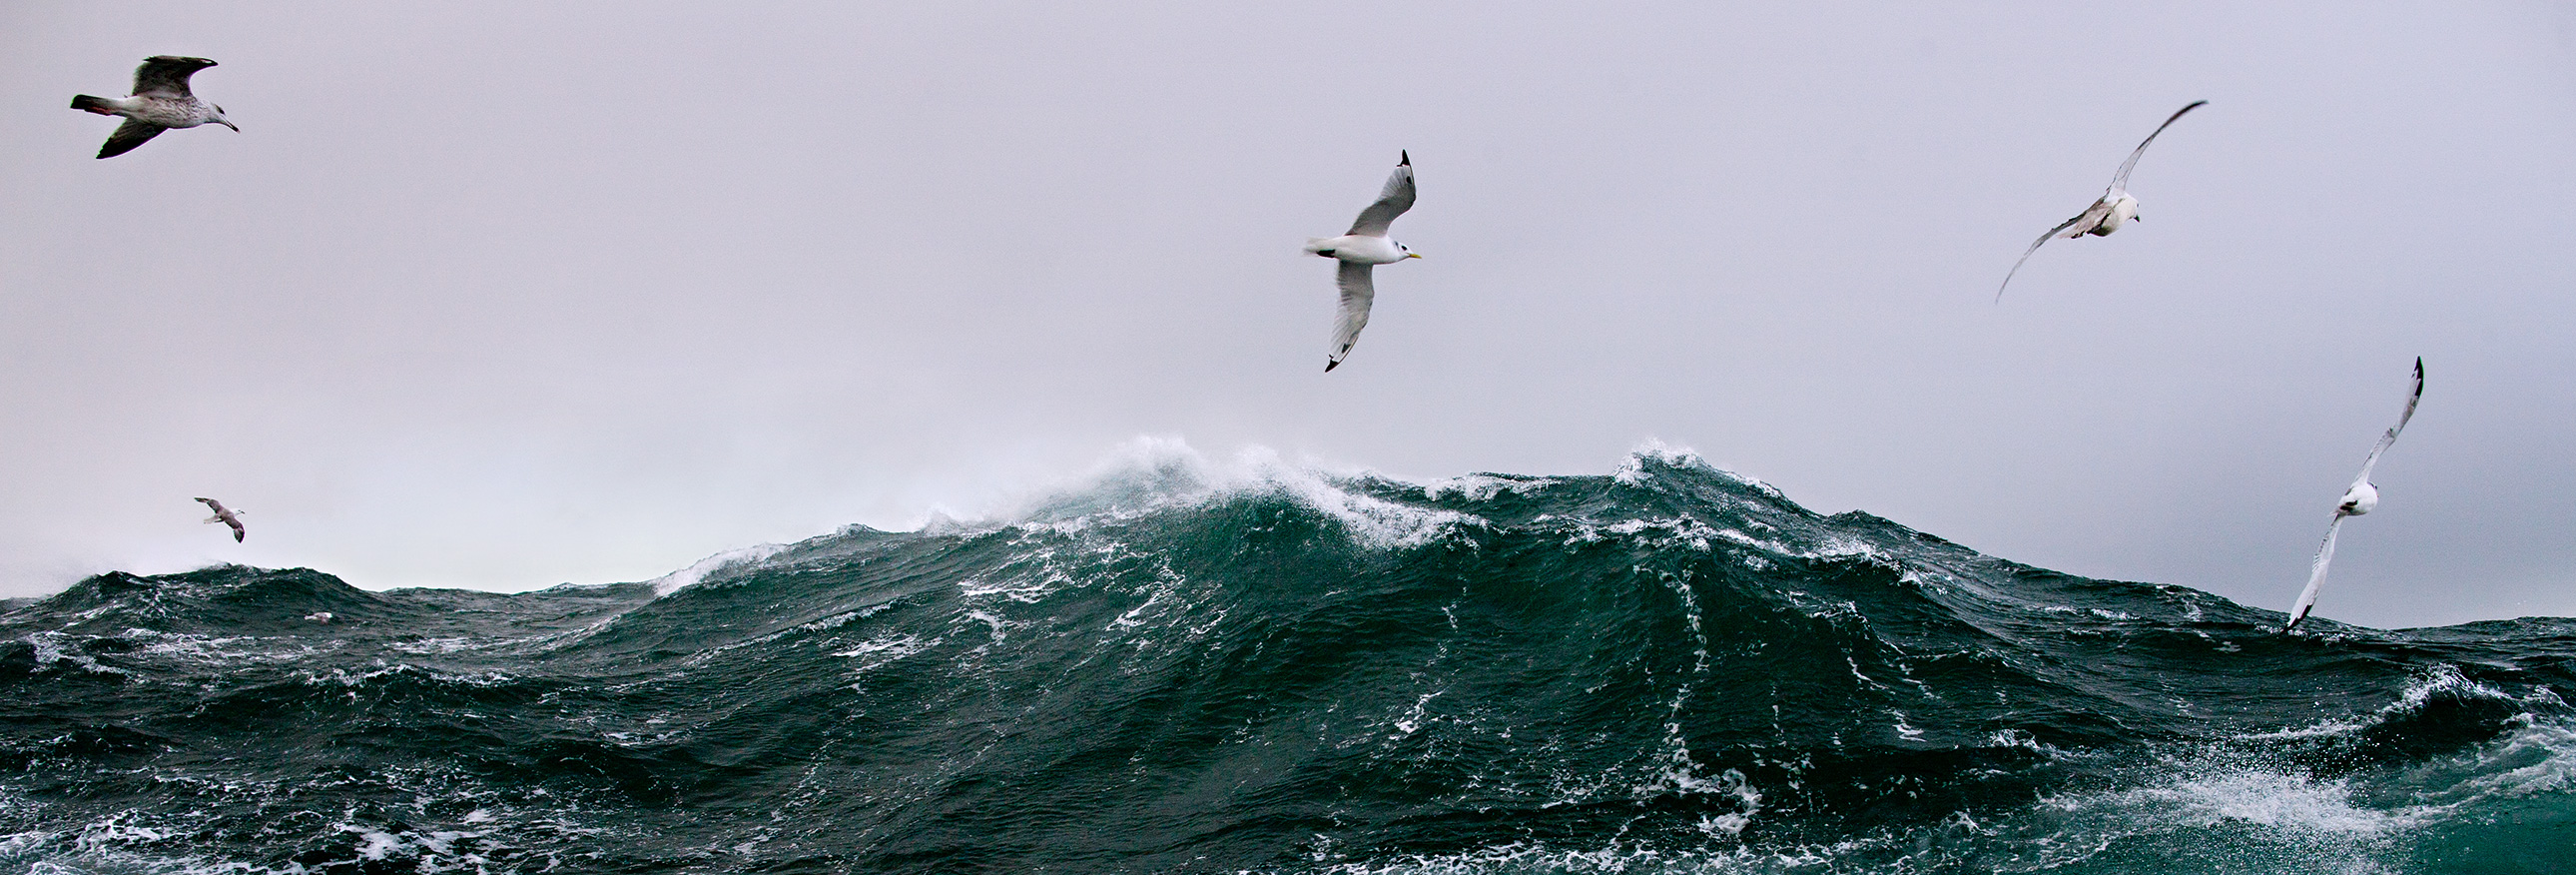 seagulls flying above rough waters